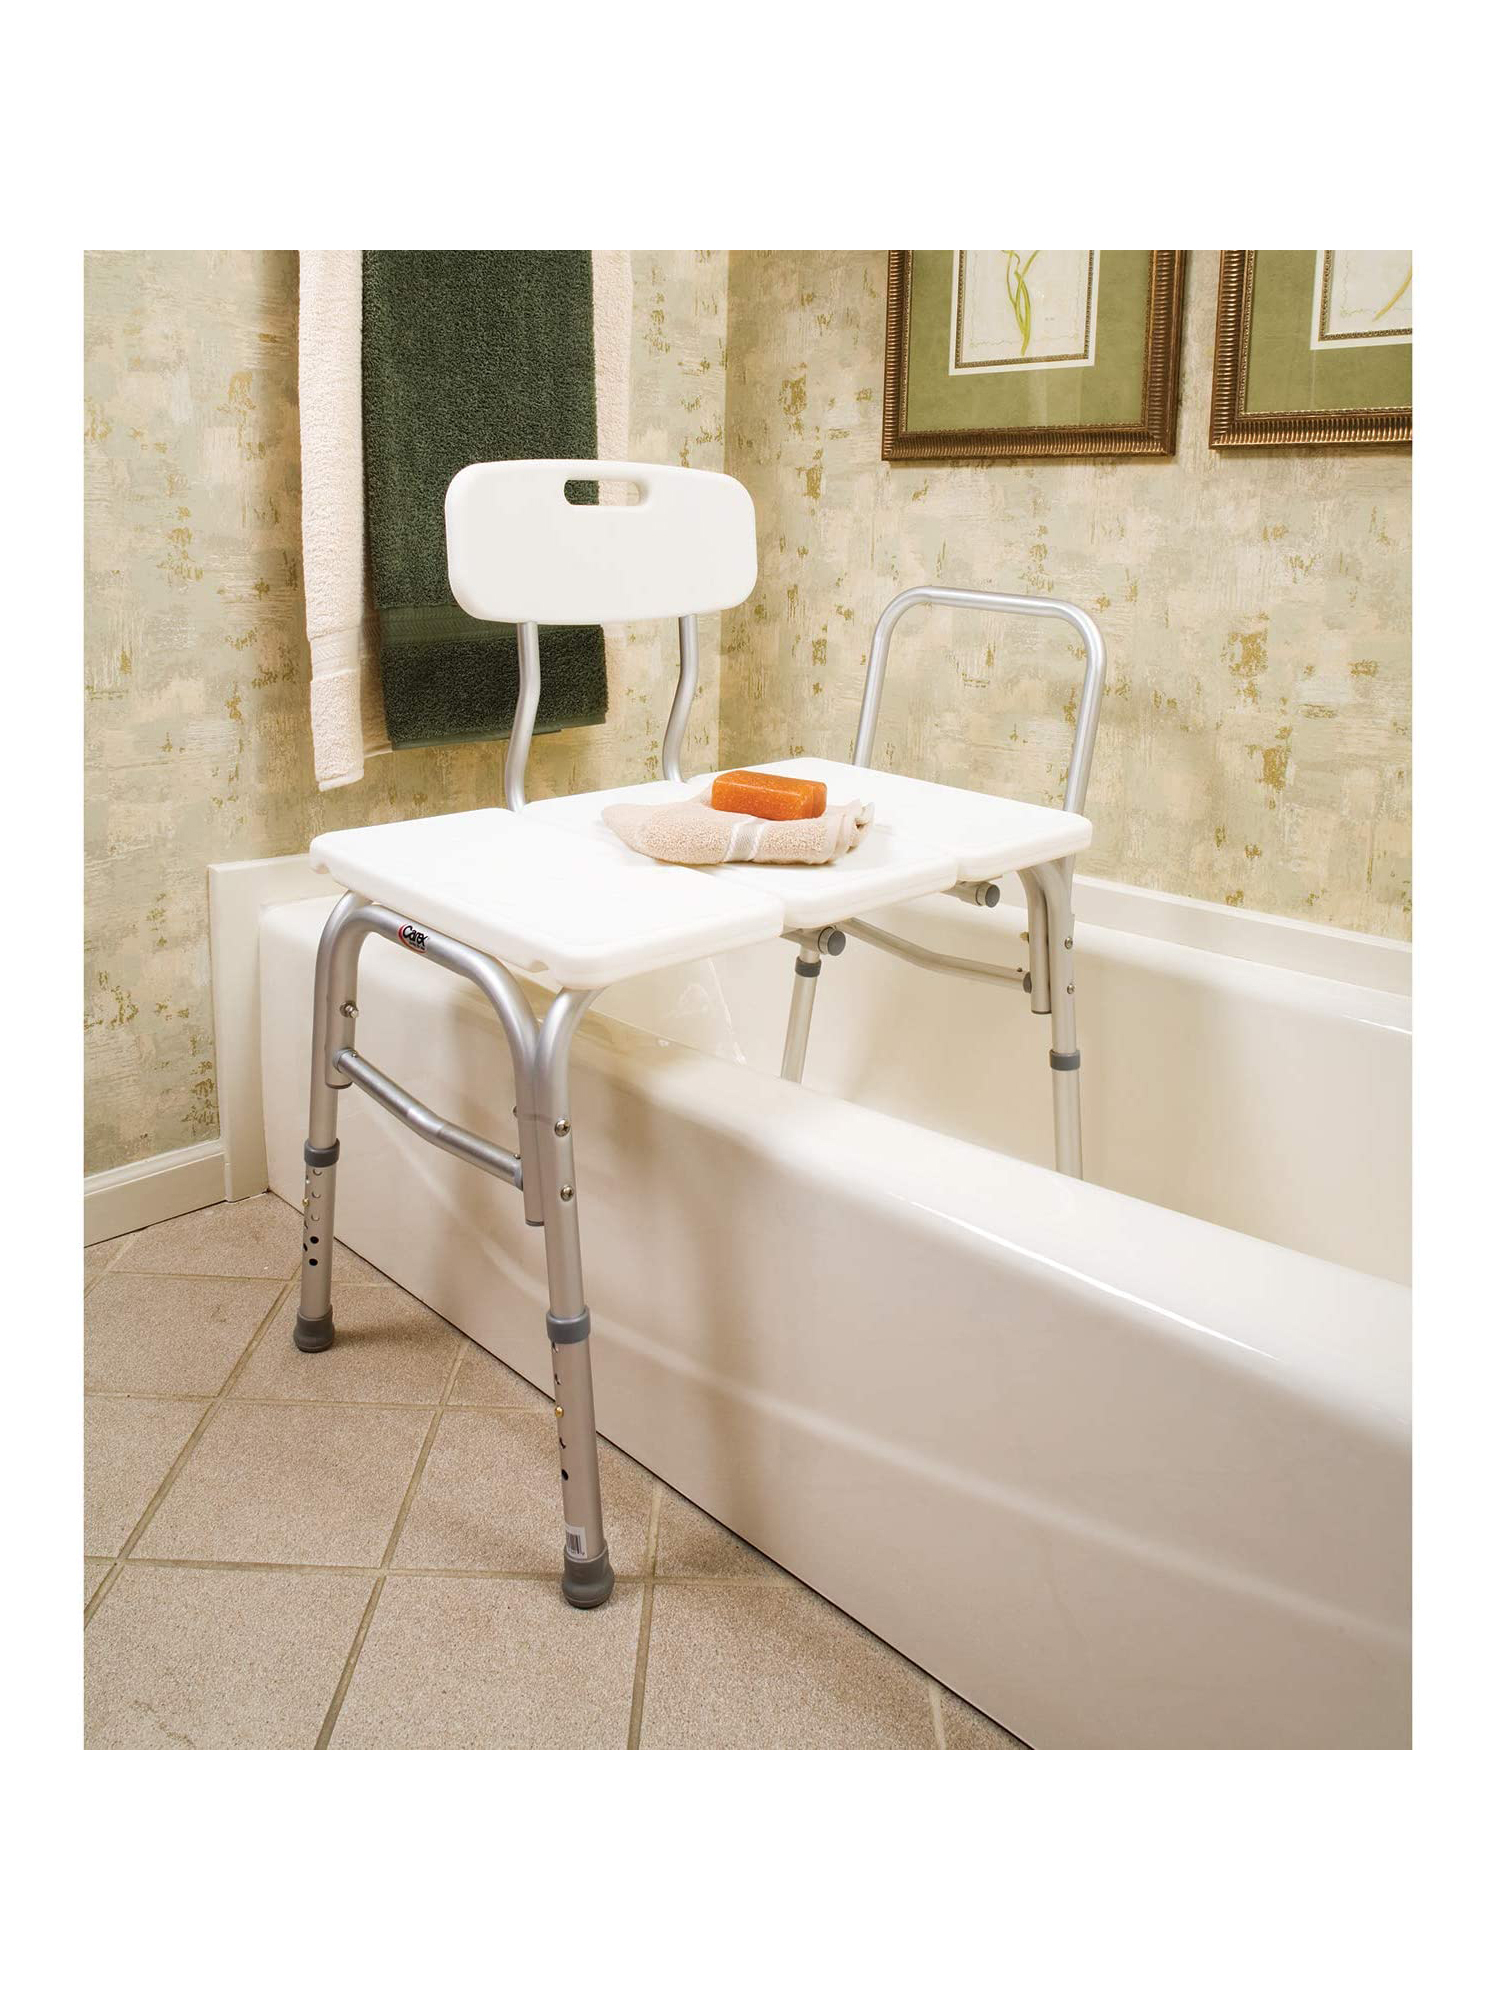 Carex Tub Transfer Bench - Shower Chair Transfer Bench with Height Adjustable Legs - Convertible to Right or Left Hand Entry